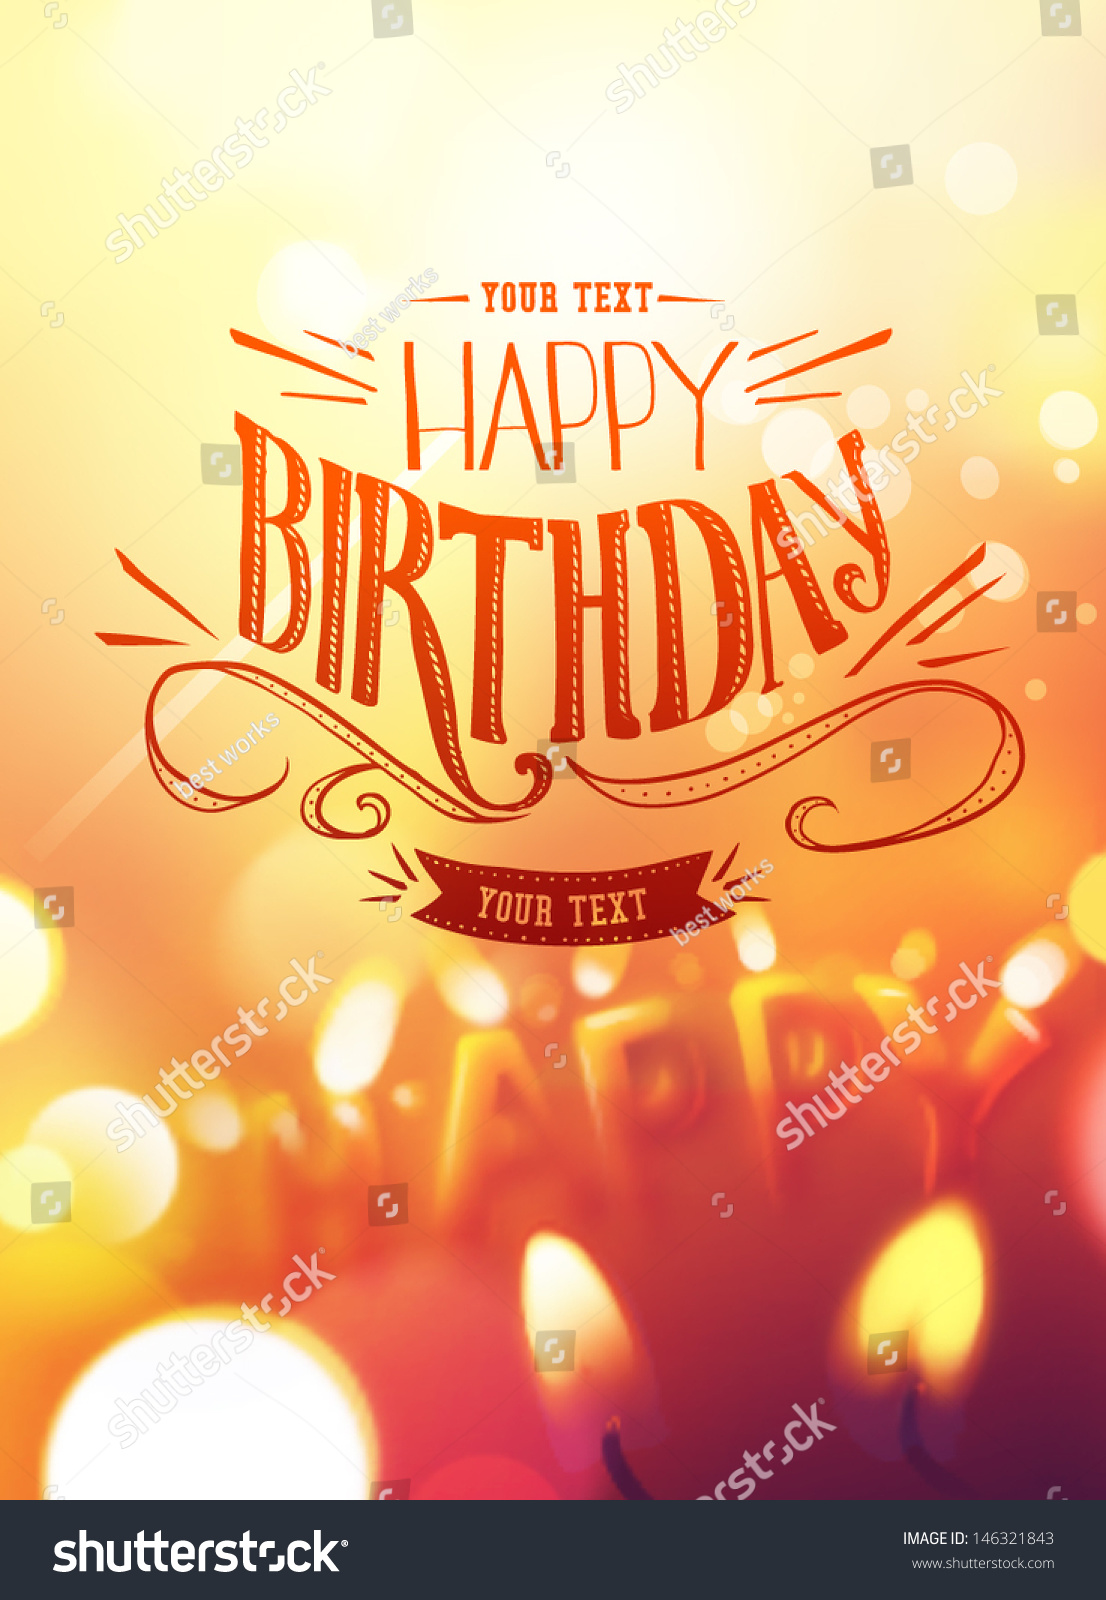 BirtHDay Card Design Candle Lights Background Stock Vector